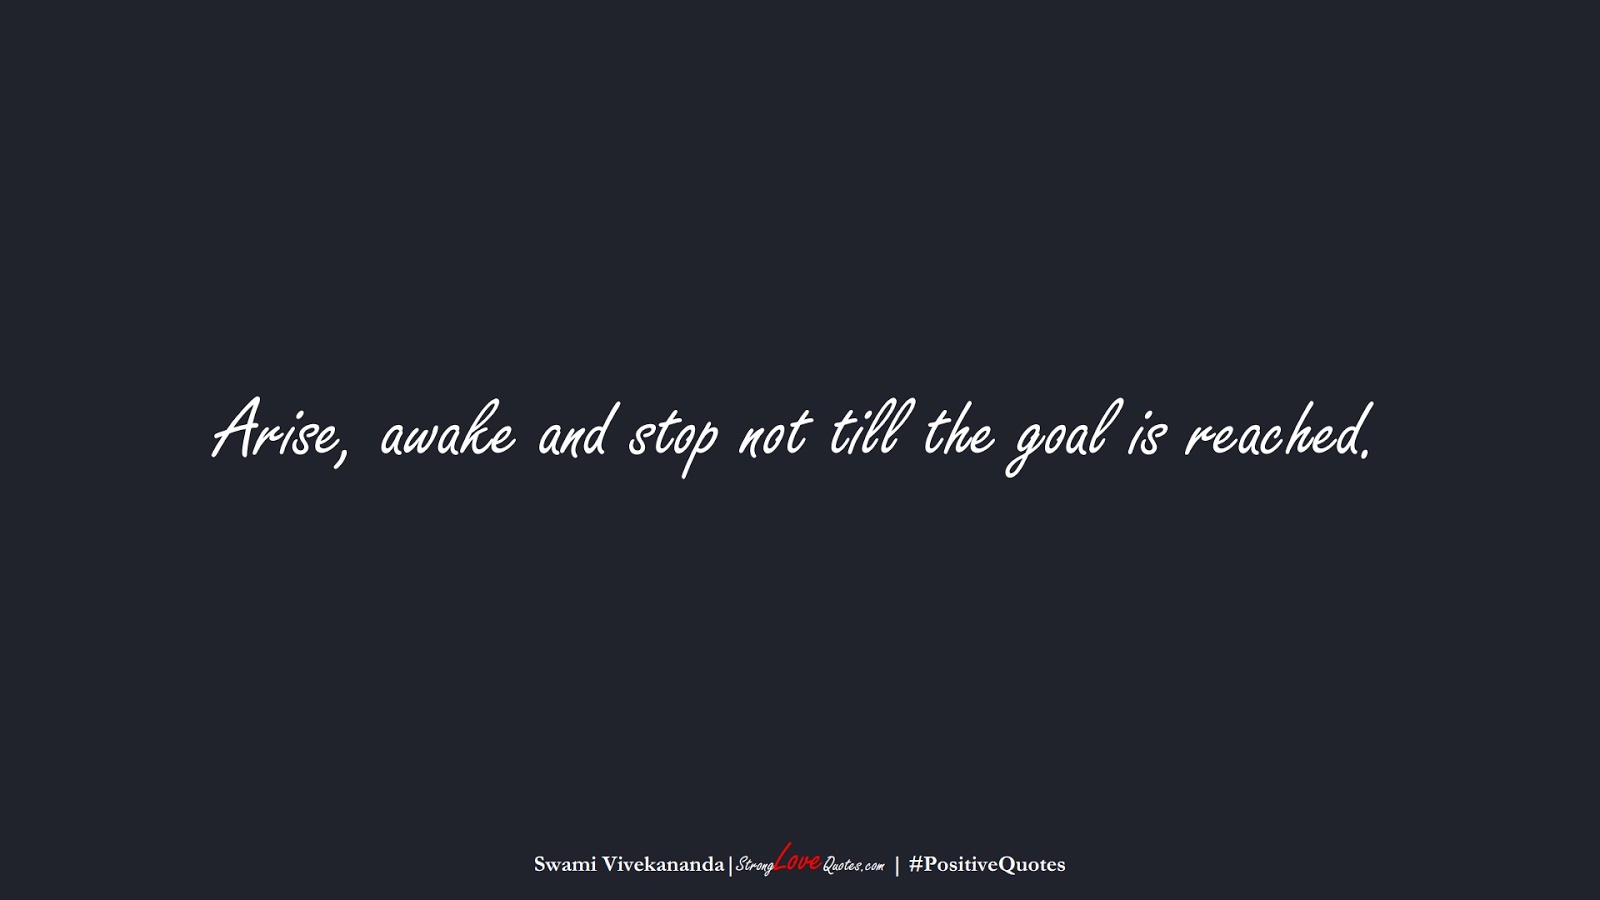 Arise, awake and stop not till the goal is reached. (Swami Vivekananda);  #PositiveQuotes